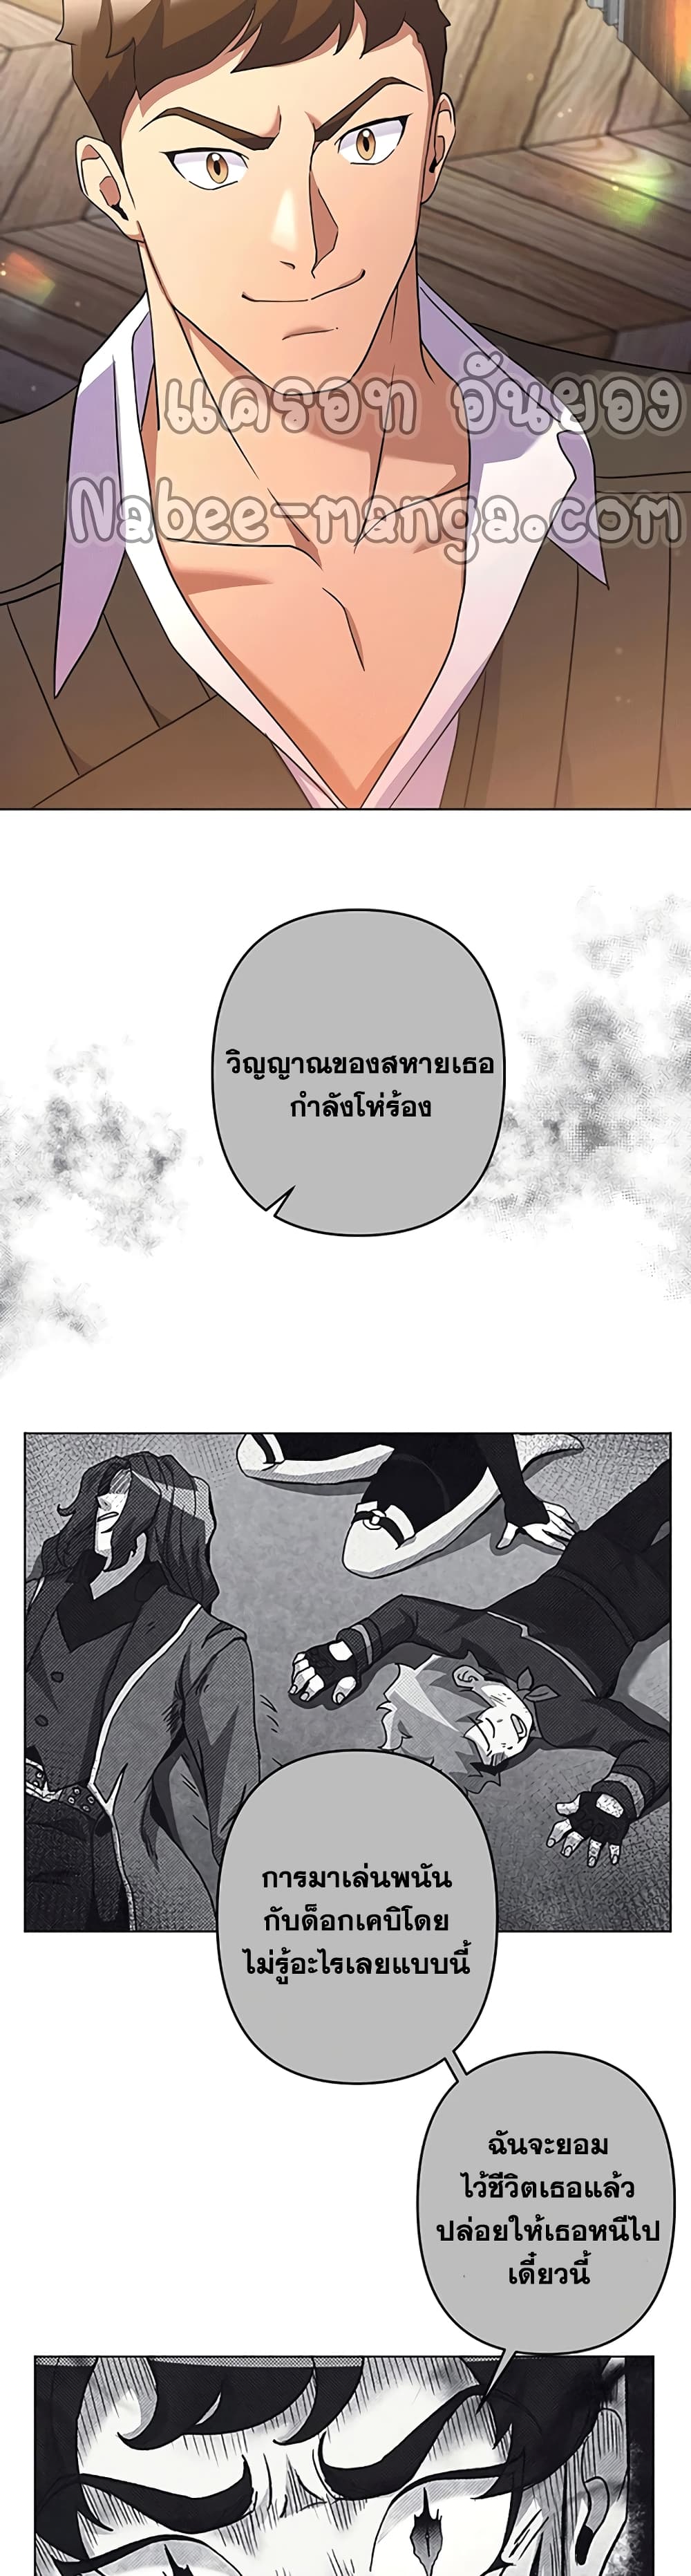 Surviving in an Action Manhwa21 (38)